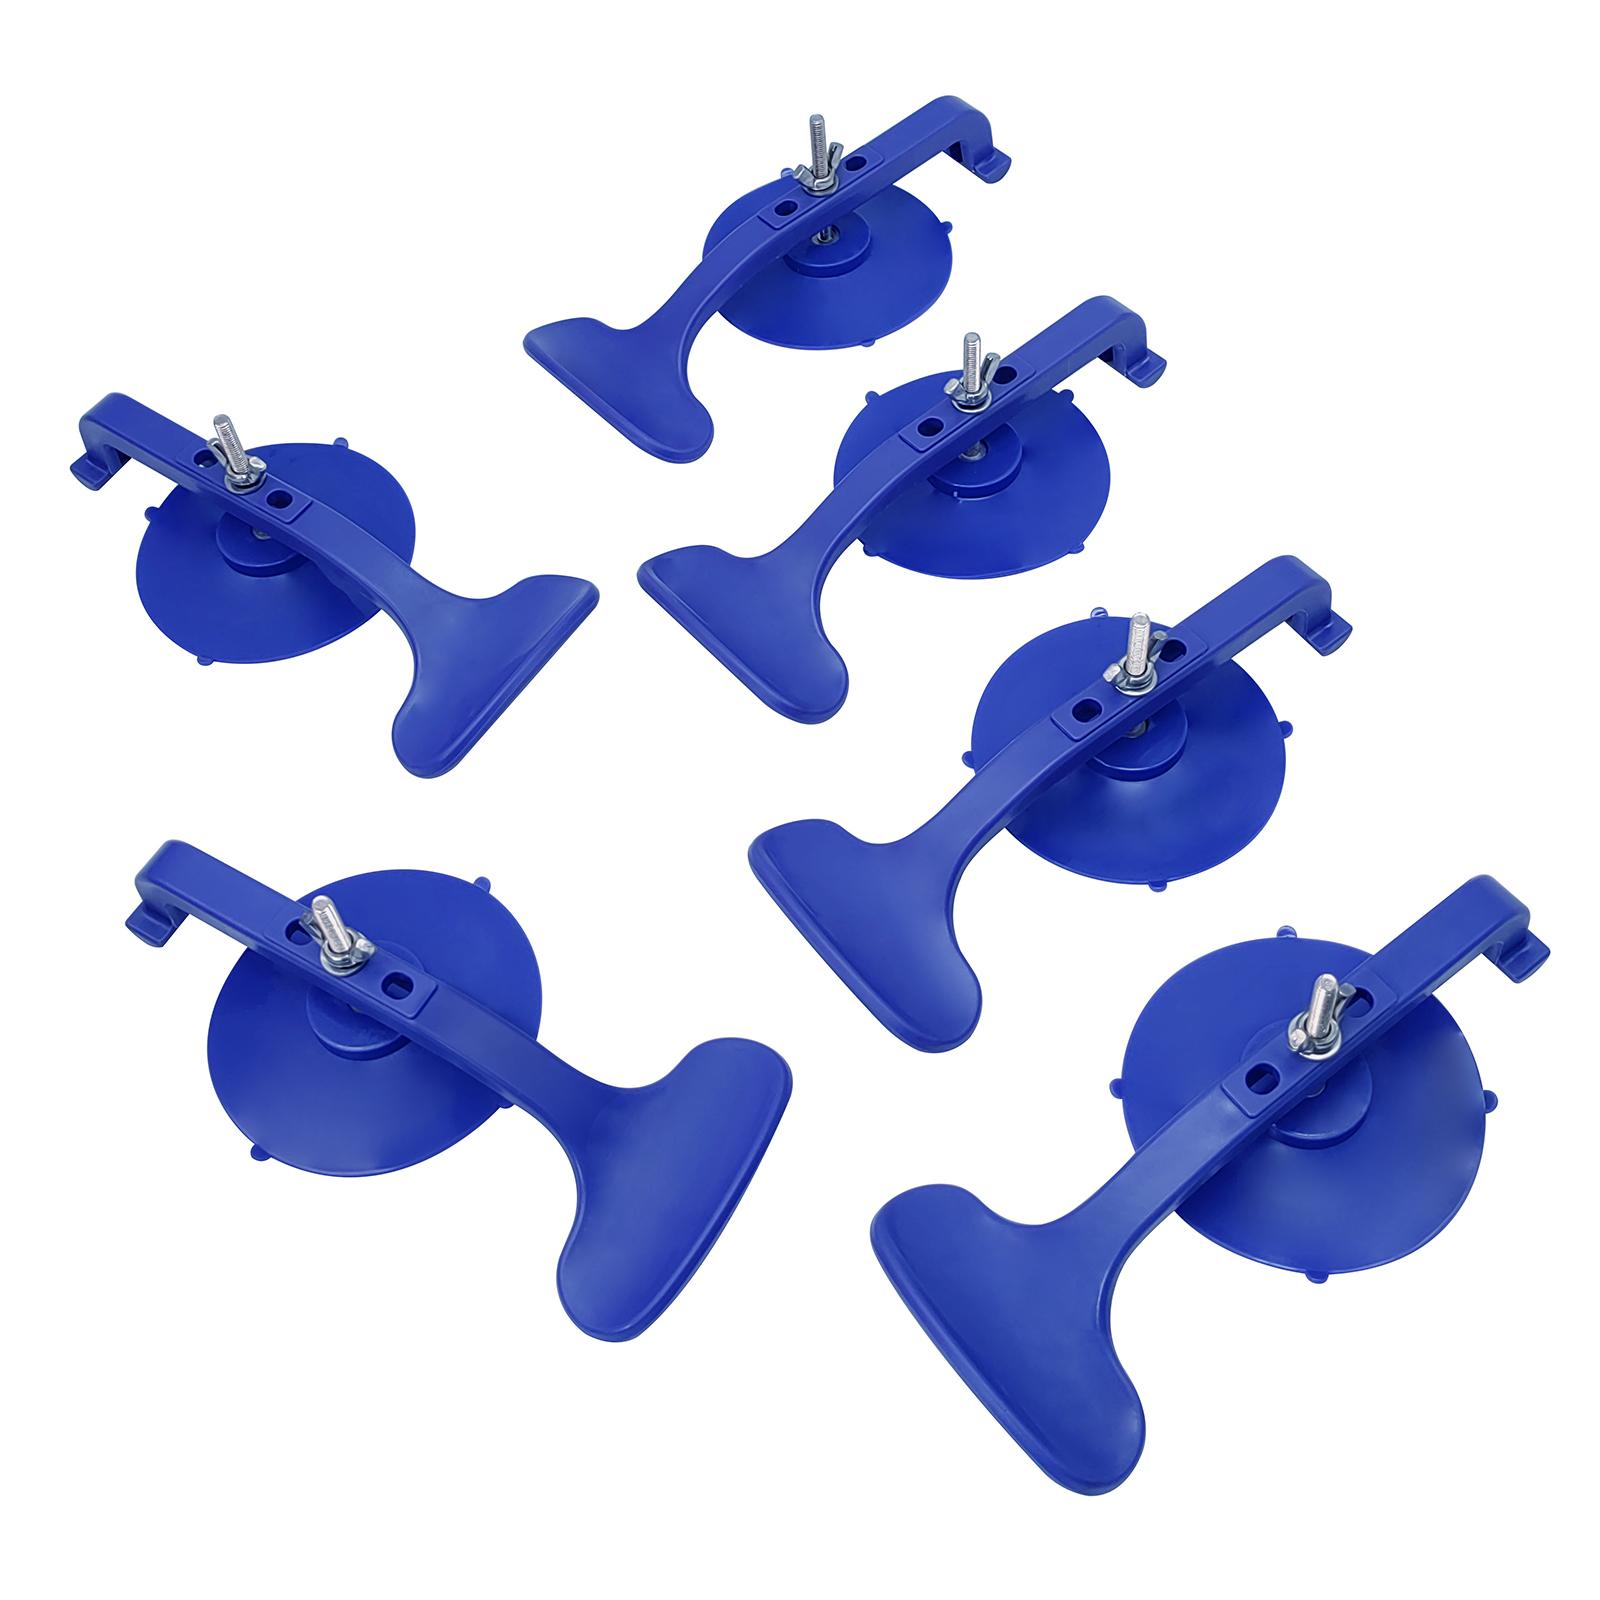 6x High Performance Suction Clamp Set Easy to Operate Blue Quick Release